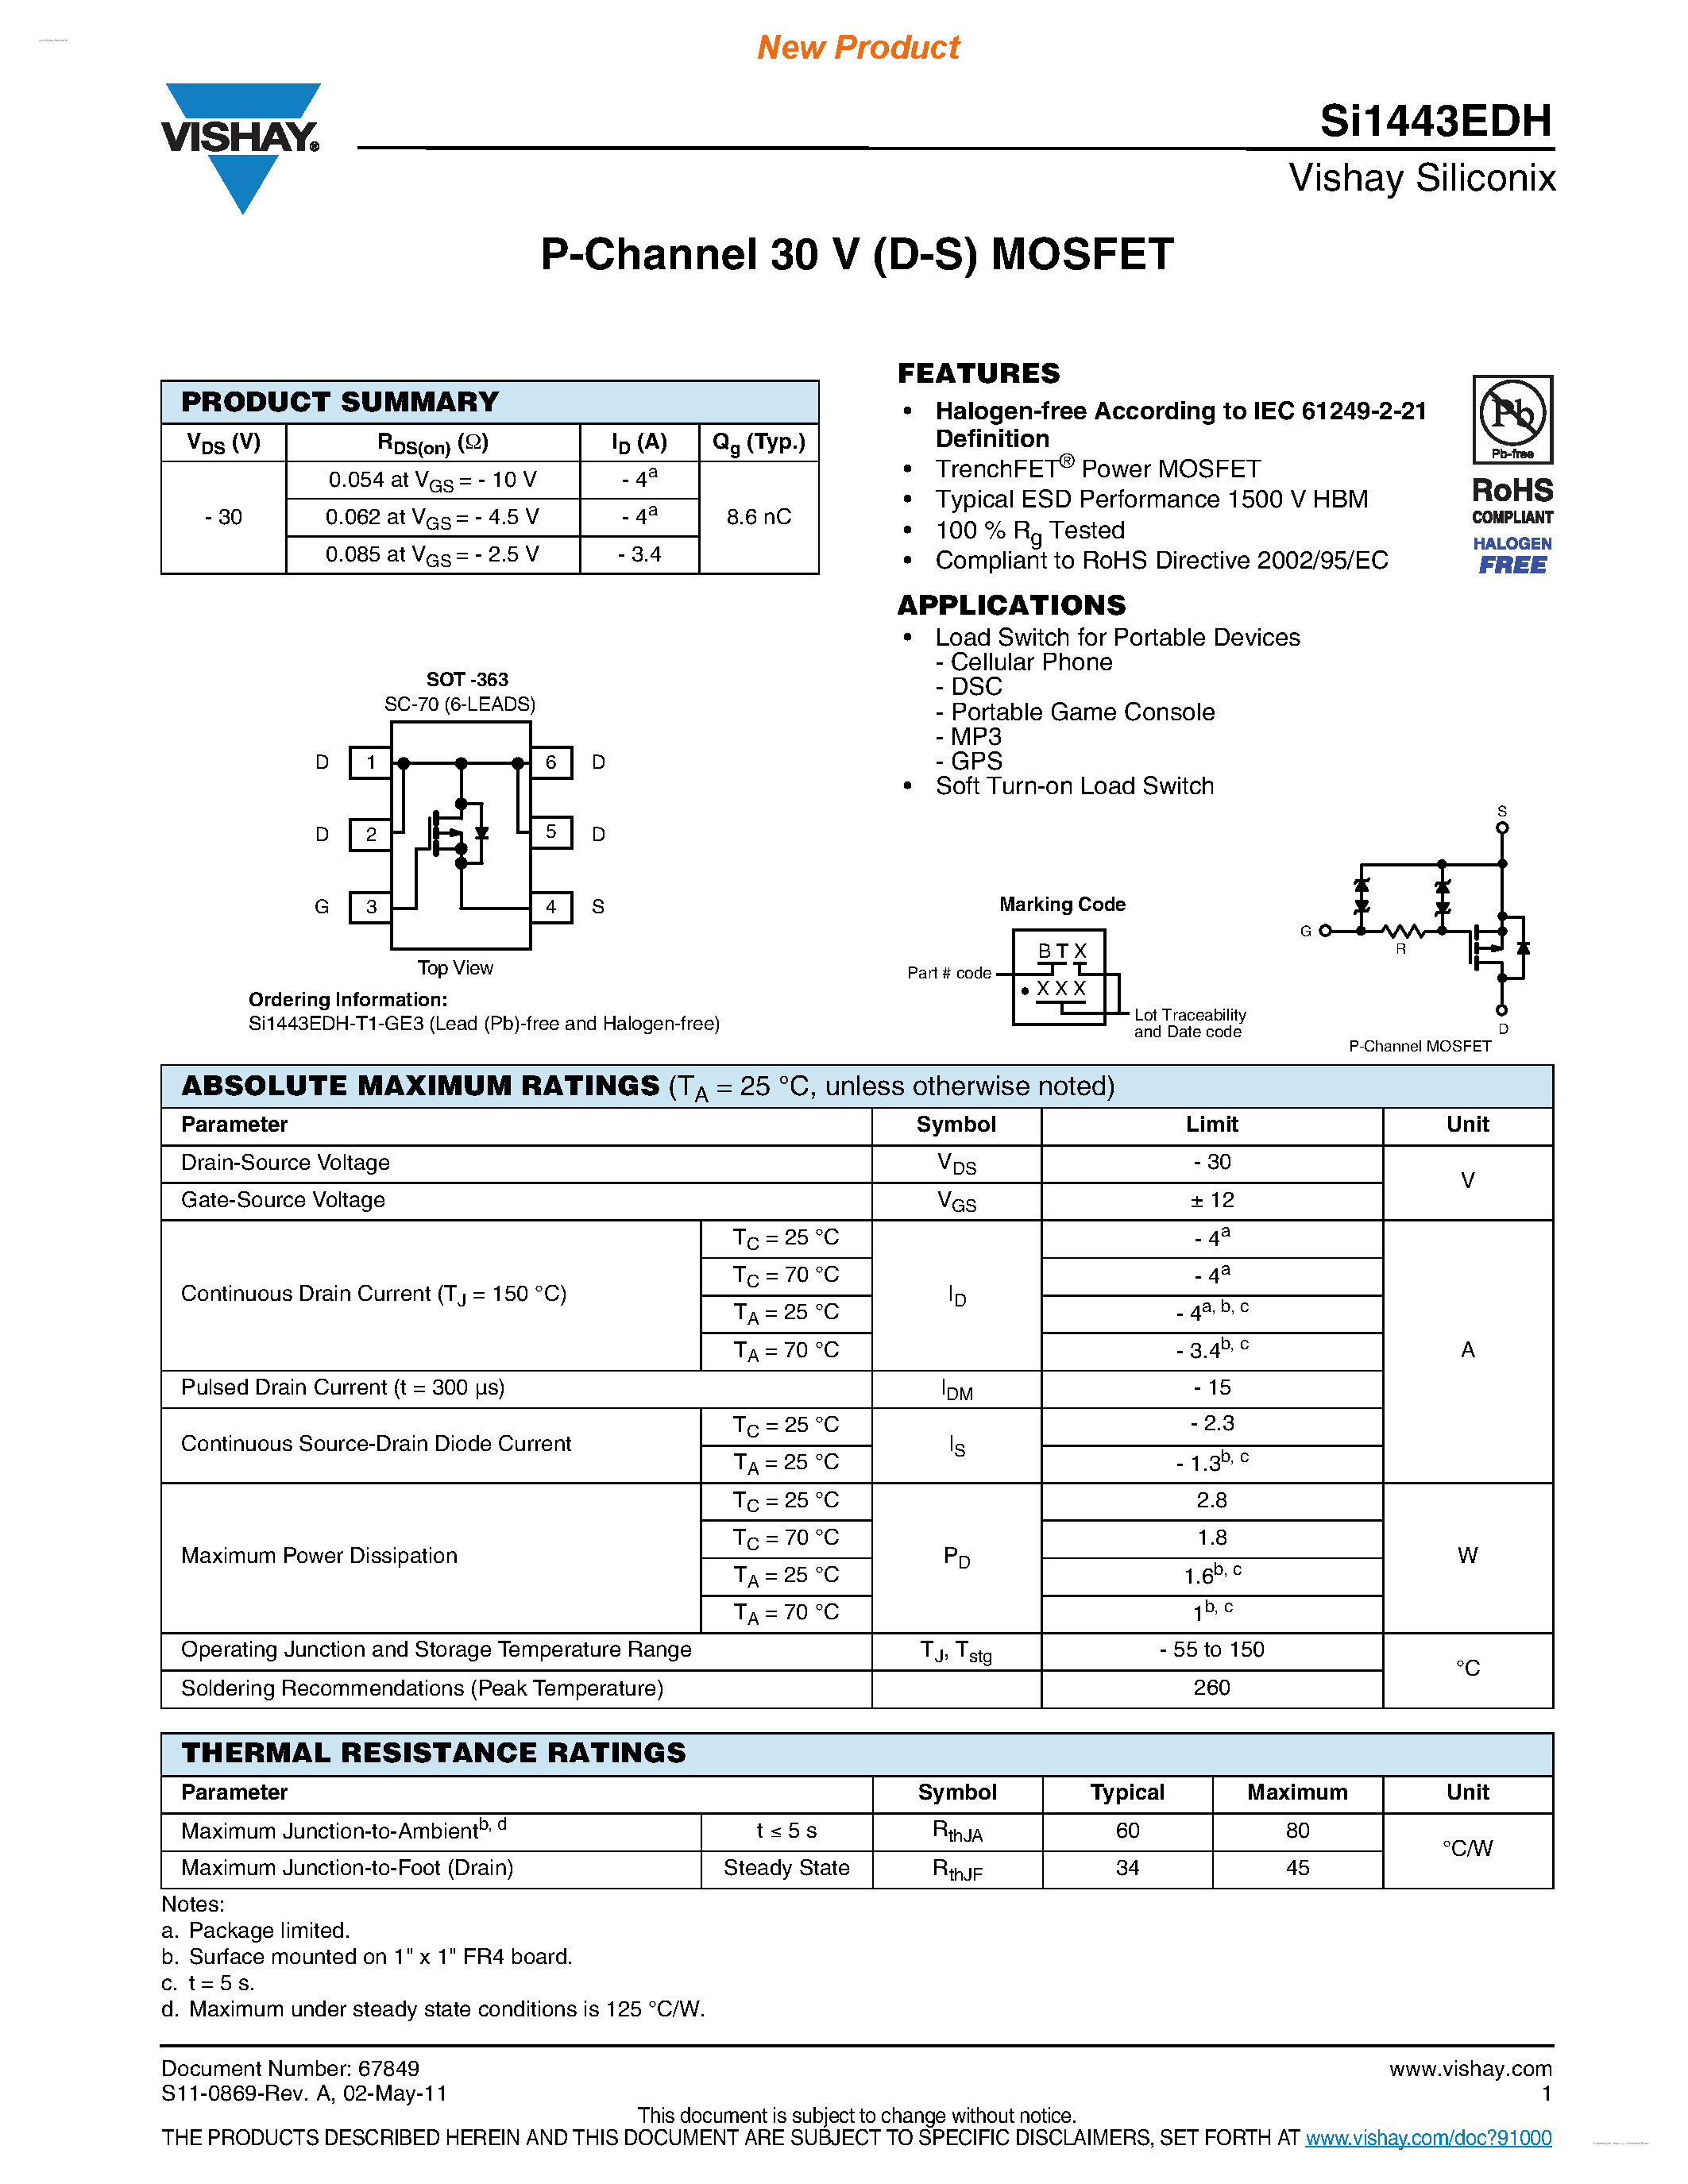 Datasheet SI1443EDH - P-Channel 30 V (D-S) MOSFET page 1